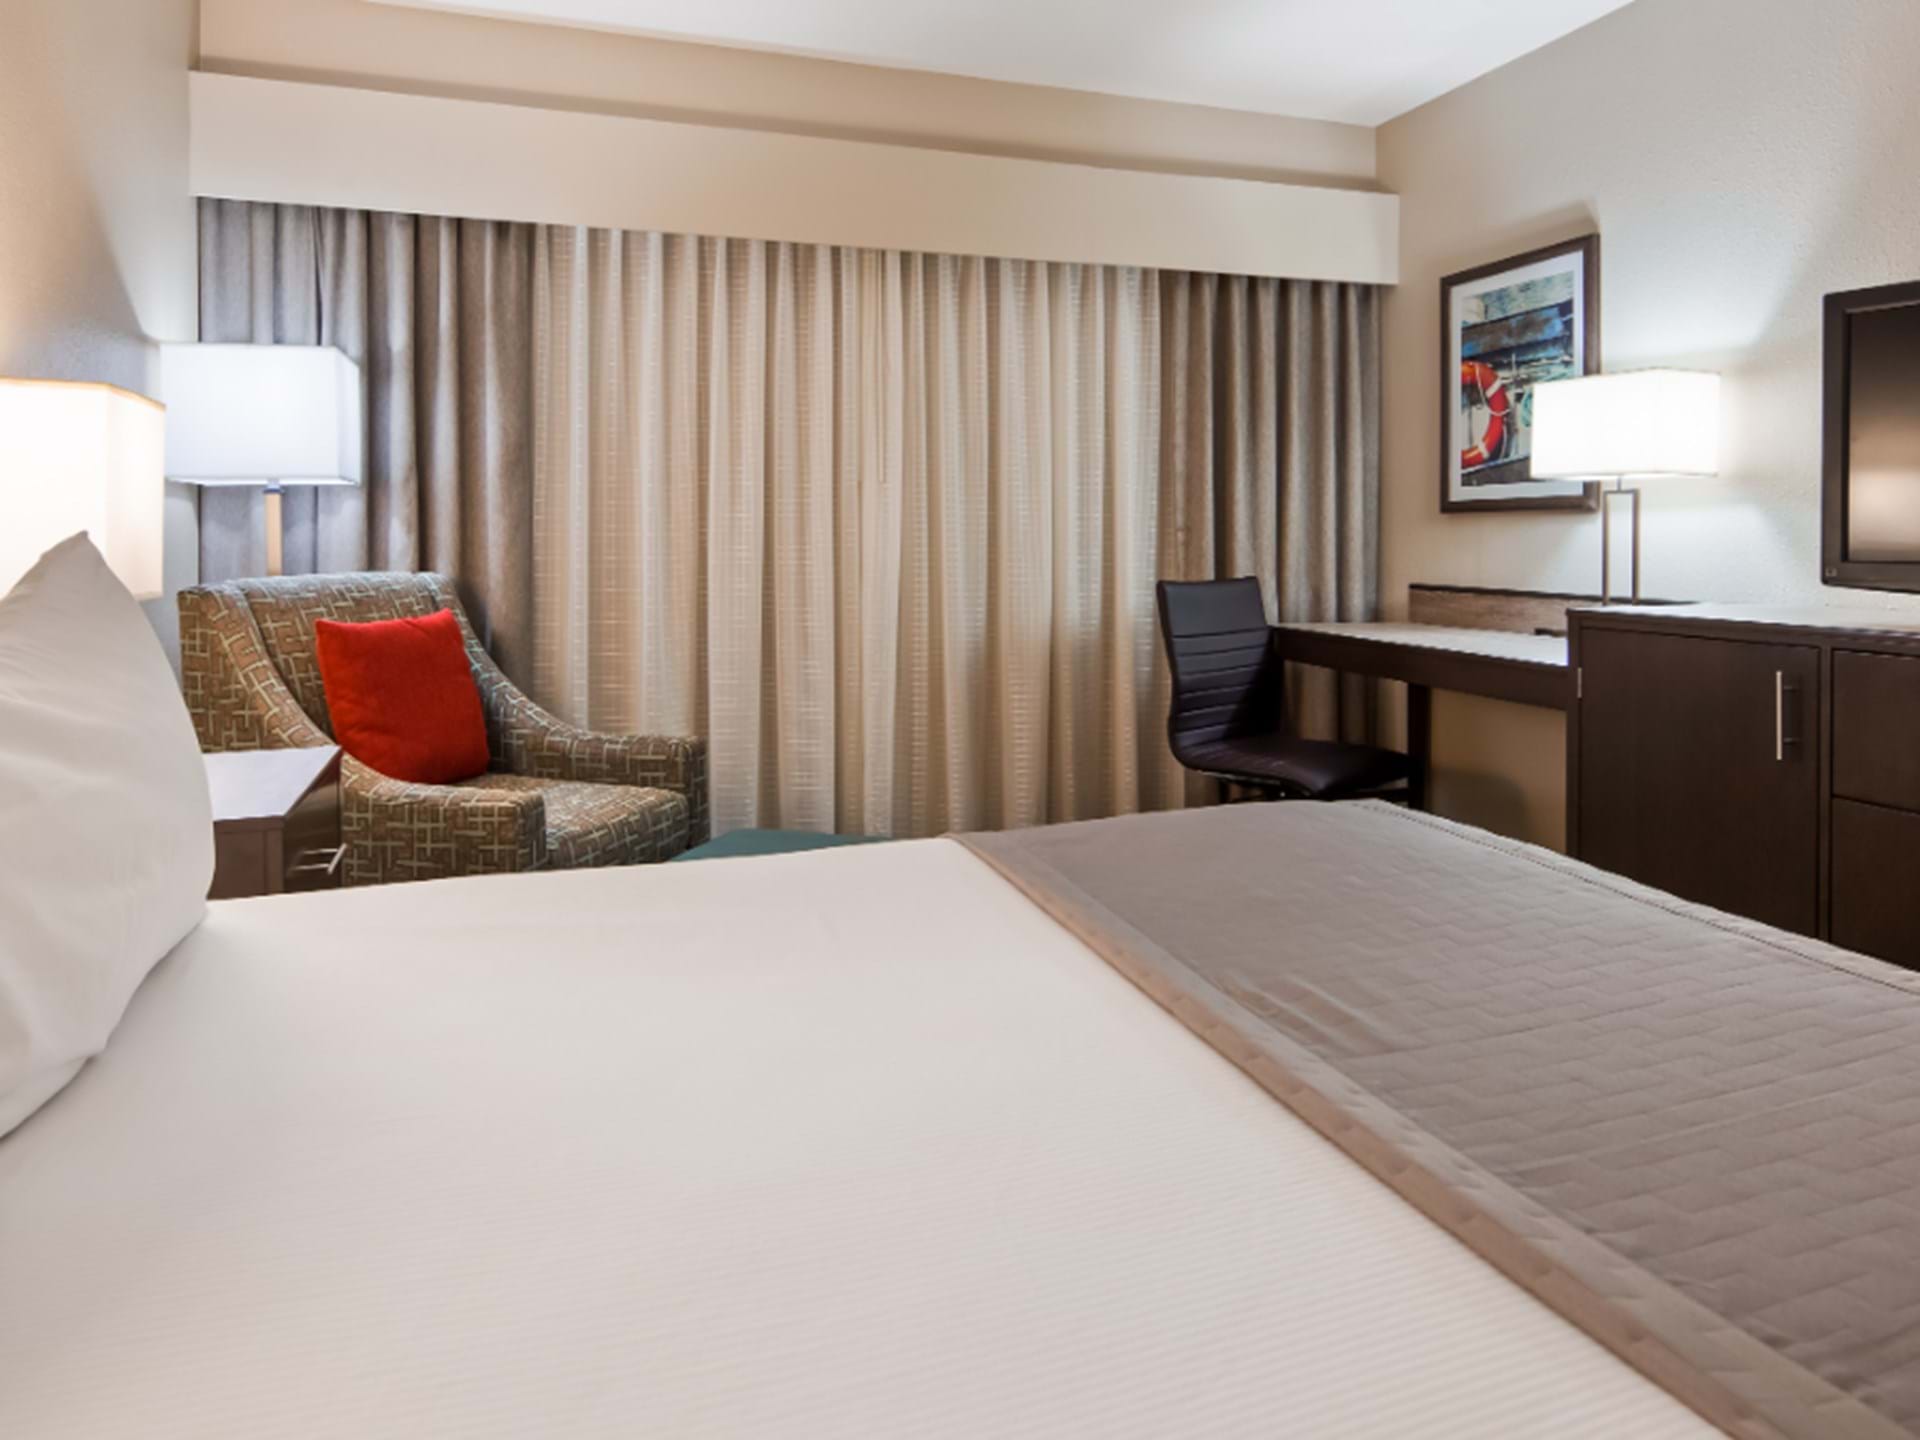 Spacious rooms for business or leisure guests alike!